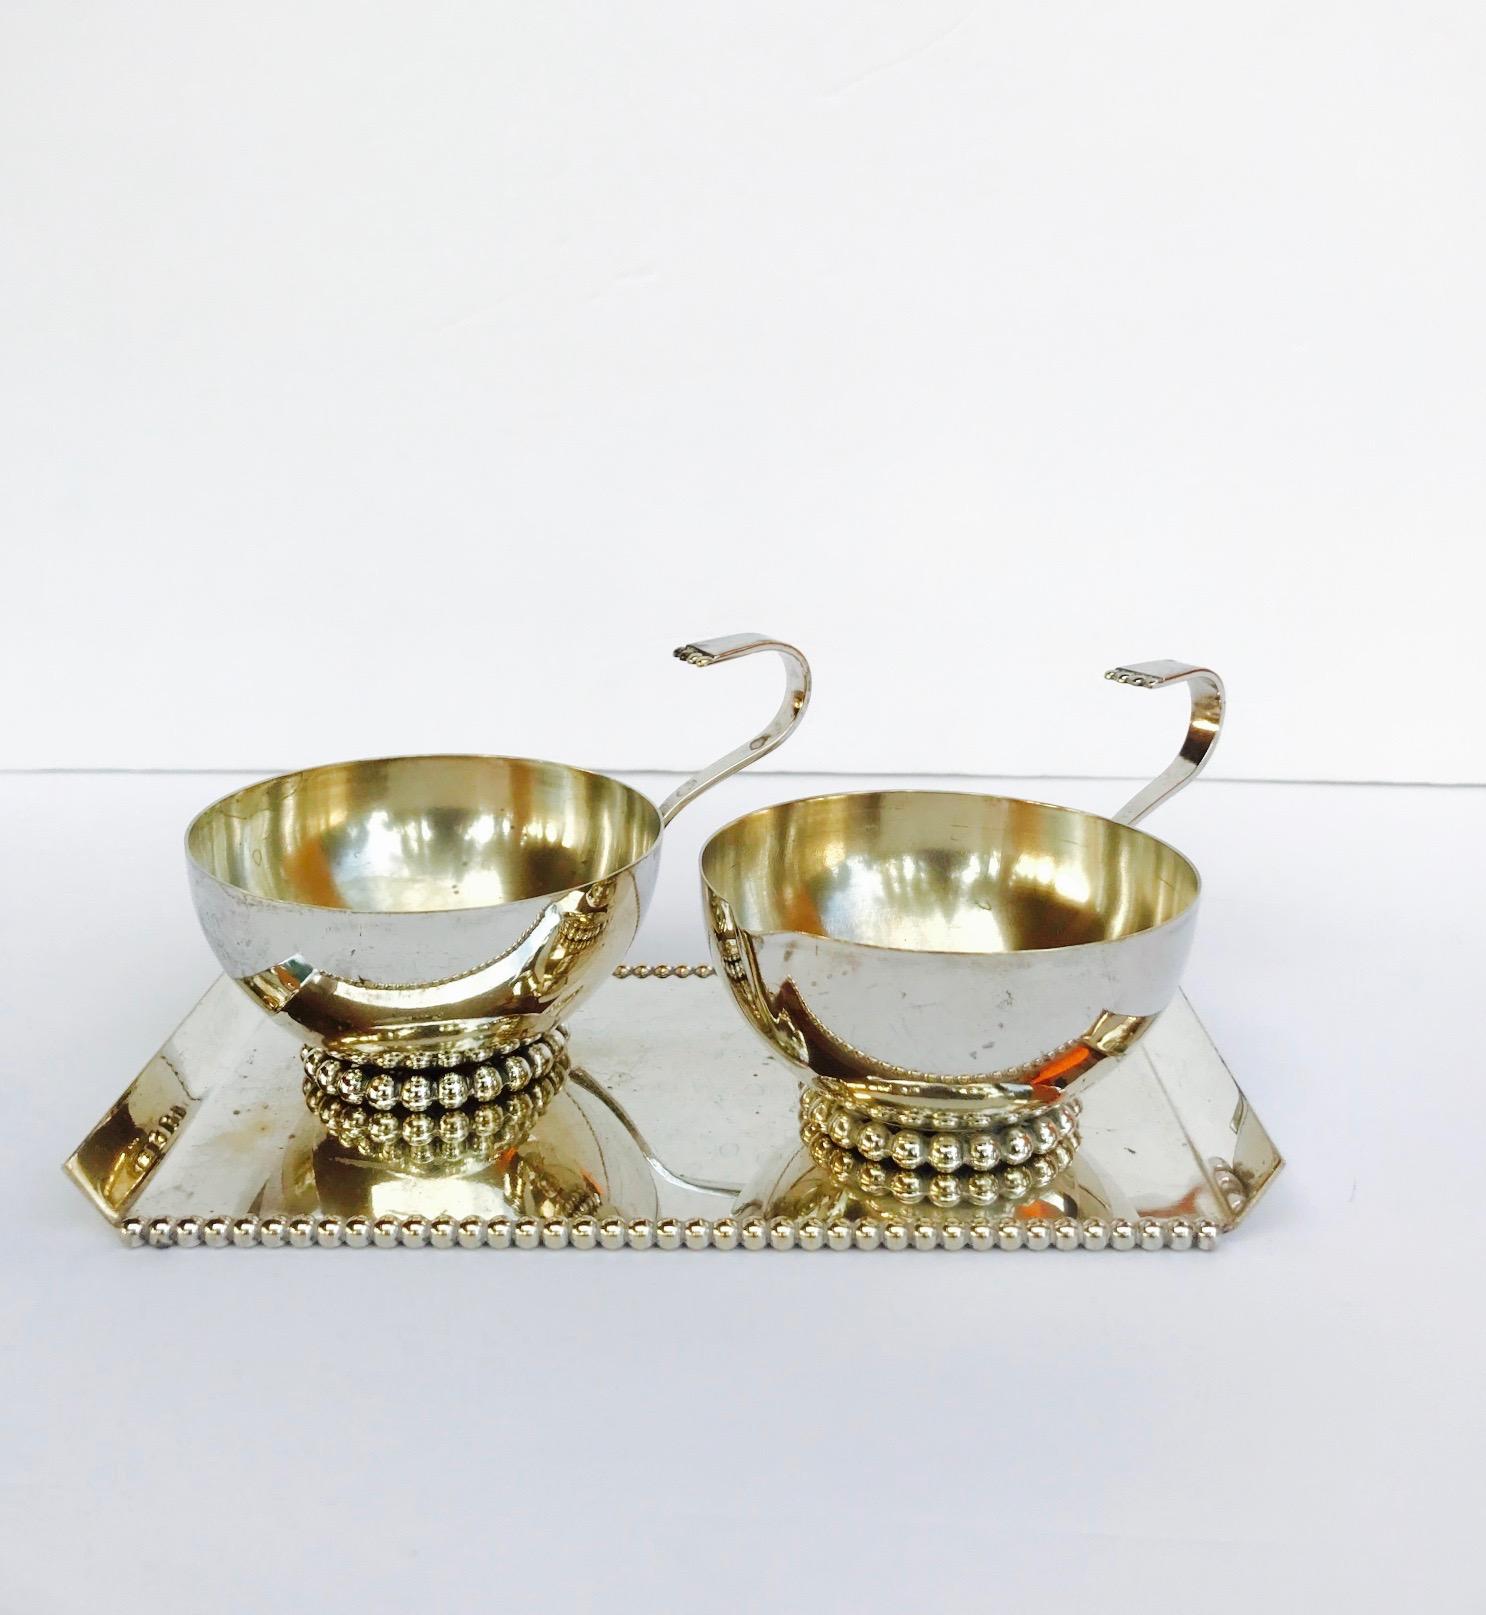 Hand-Crafted Vintage Silver Plated Sugar and Creamer Serving Set, Italy, C. 1970s For Sale